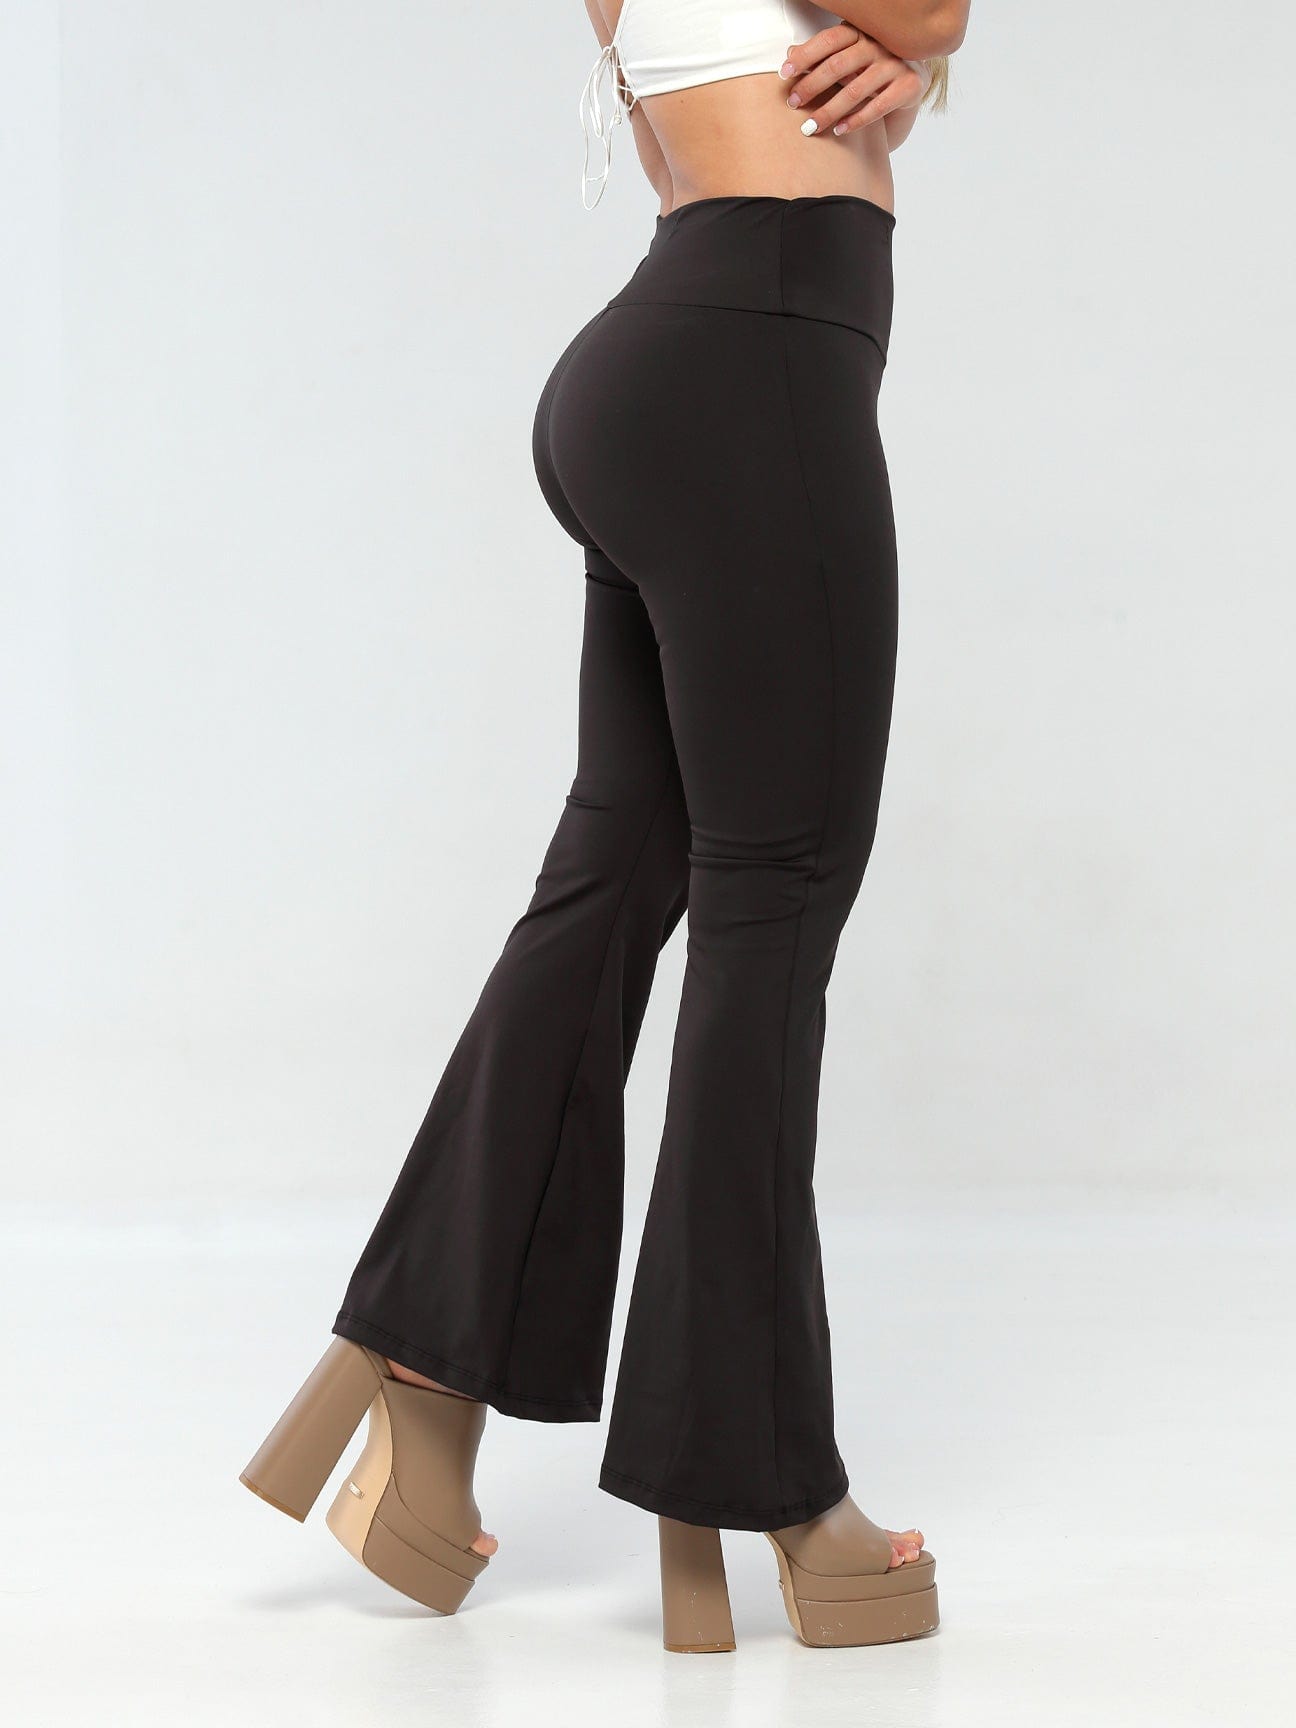 Miss Independent Butt Lift Flare Leggings with Tummy Control